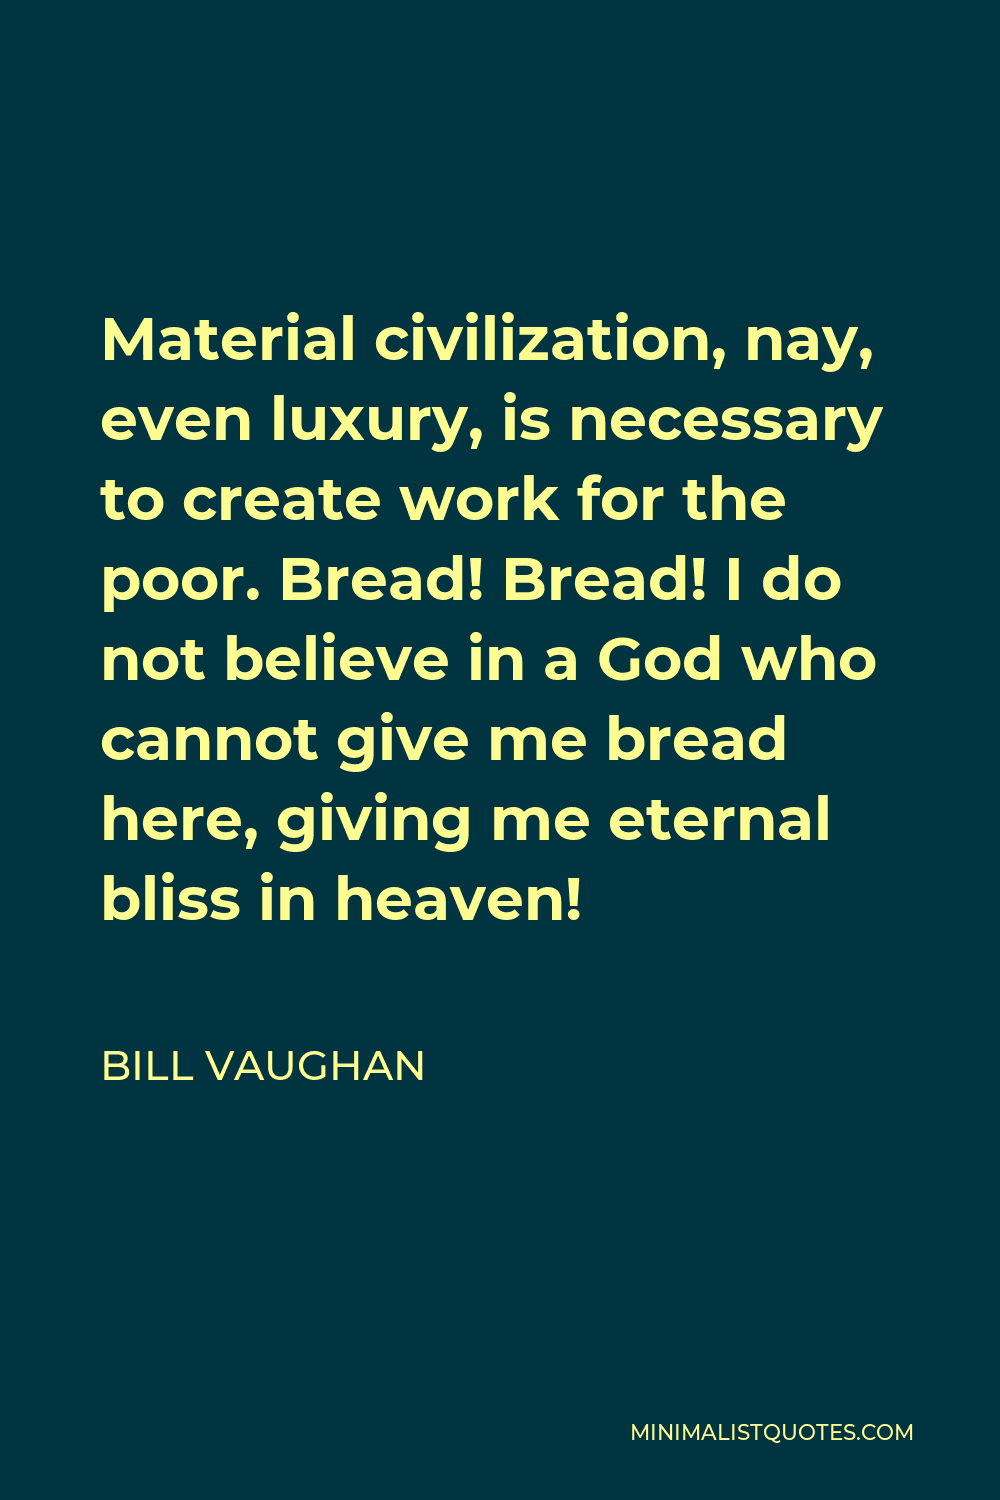 Bill Vaughan Quote - Material civilization, nay, even luxury, is necessary to create work for the poor. Bread! Bread! I do not believe in a God who cannot give me bread here, giving me eternal bliss in heaven!